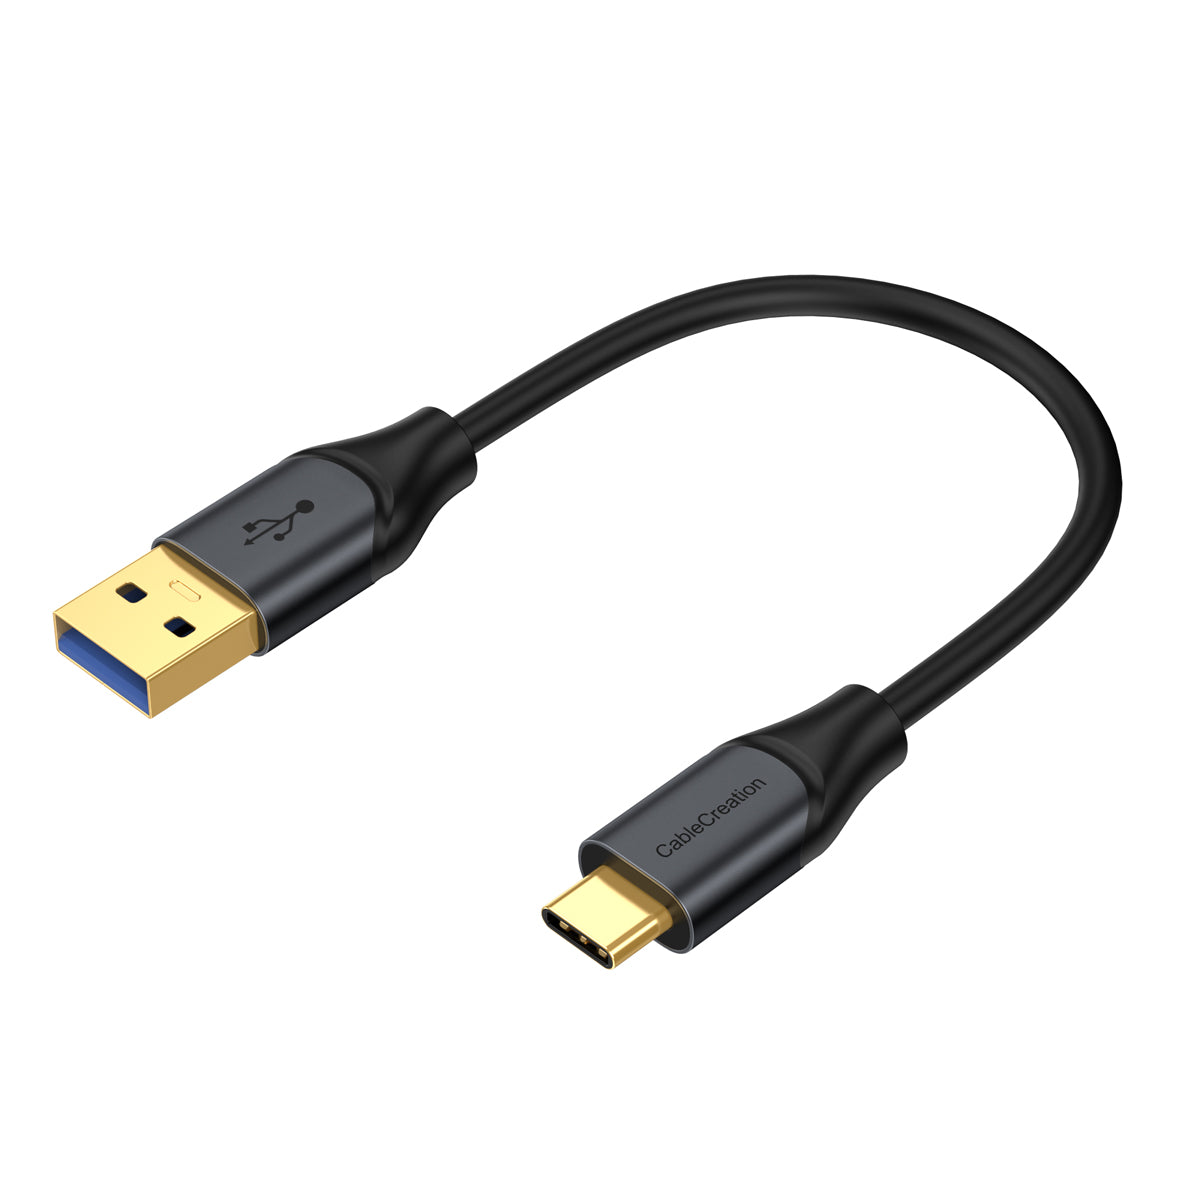 Cable Usb C Corto A Usb C, Cablecreation Tipo C Cable Usb C